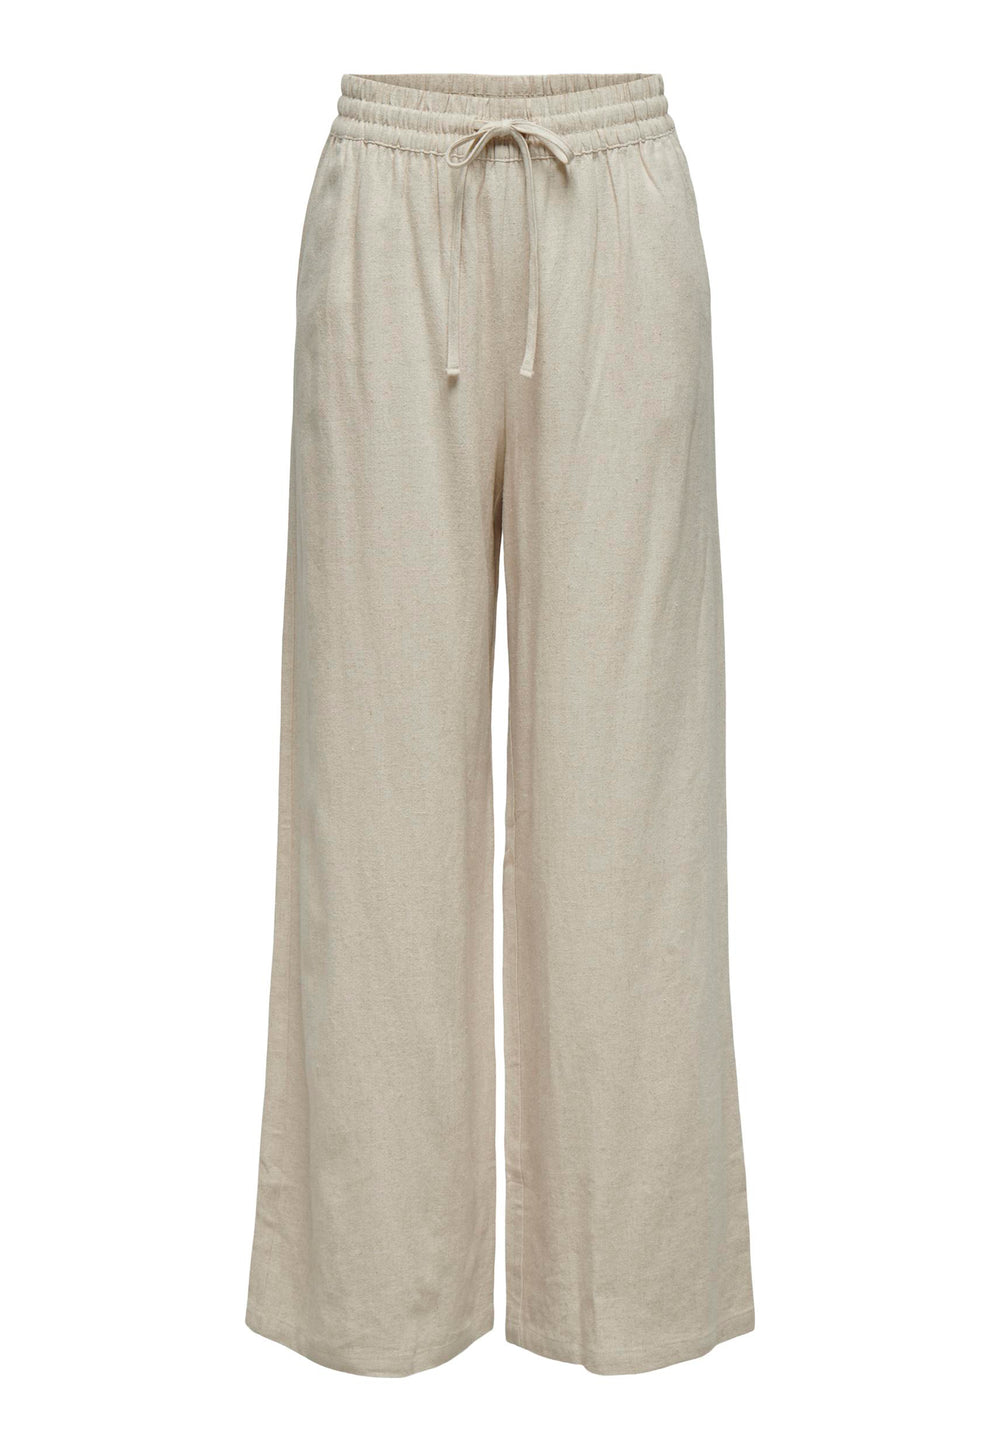 JDY Say High Waisted Wide Leg Linen Trousers with Tie Waist in Beige - One Nation Clothing